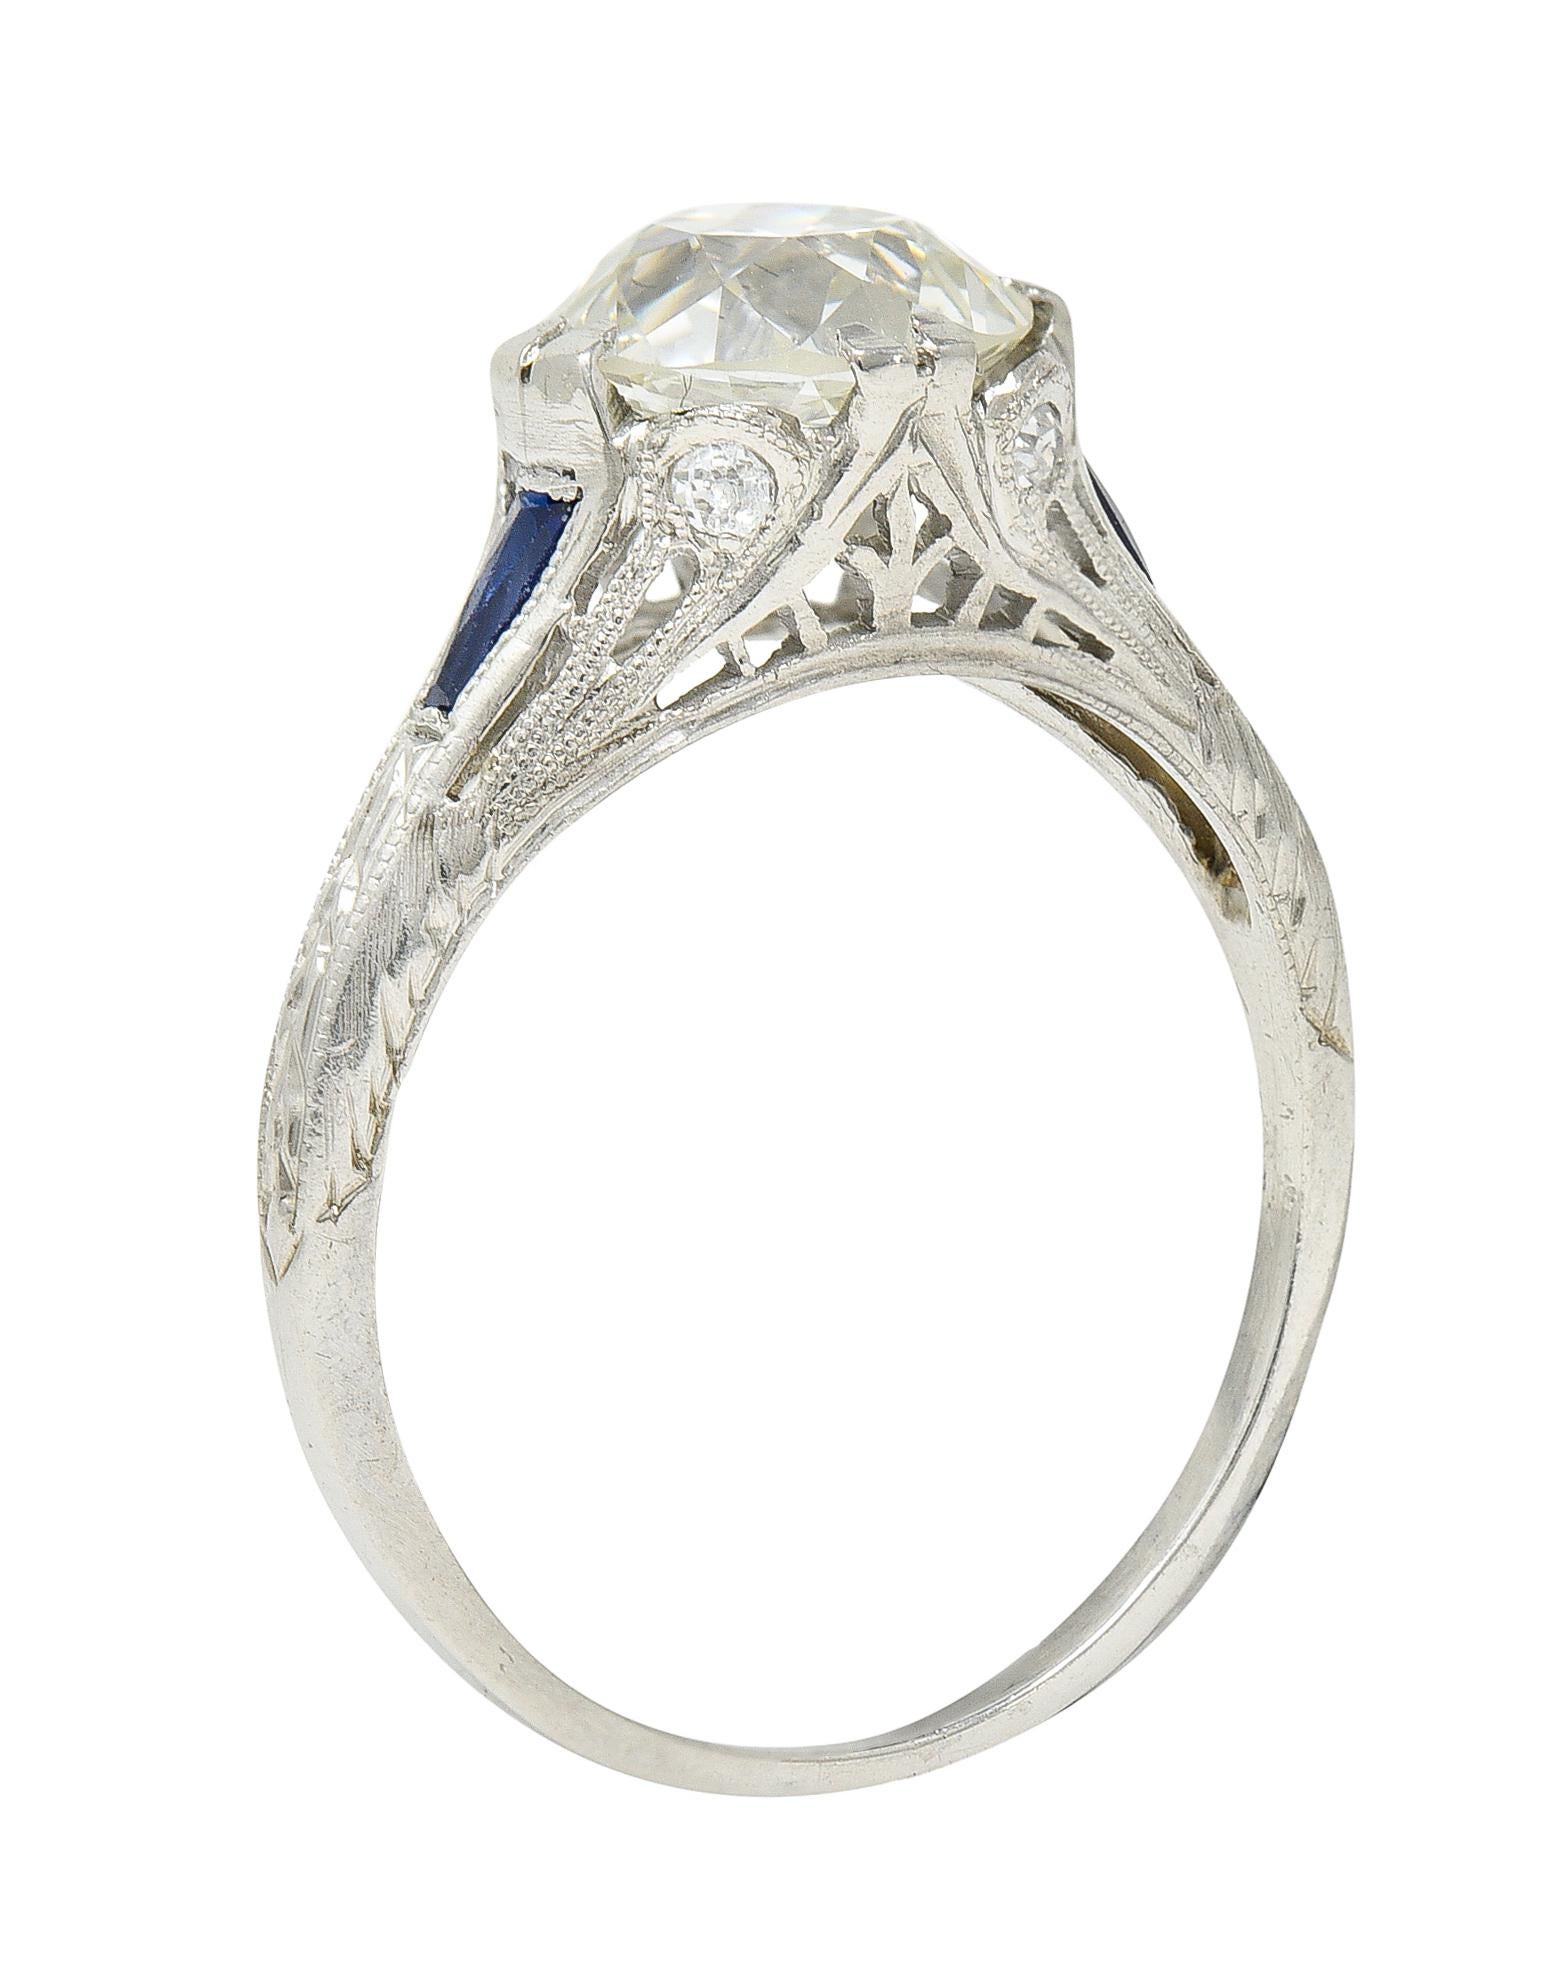 Featuring an old European cut diamond weighing 1.85 carat with K color and VVS2 clarity. Set by wide split prongs in a decoratively pierced mounting with milgrain details. Flanked by tapered baguette synthetic sapphires - well matched and bright